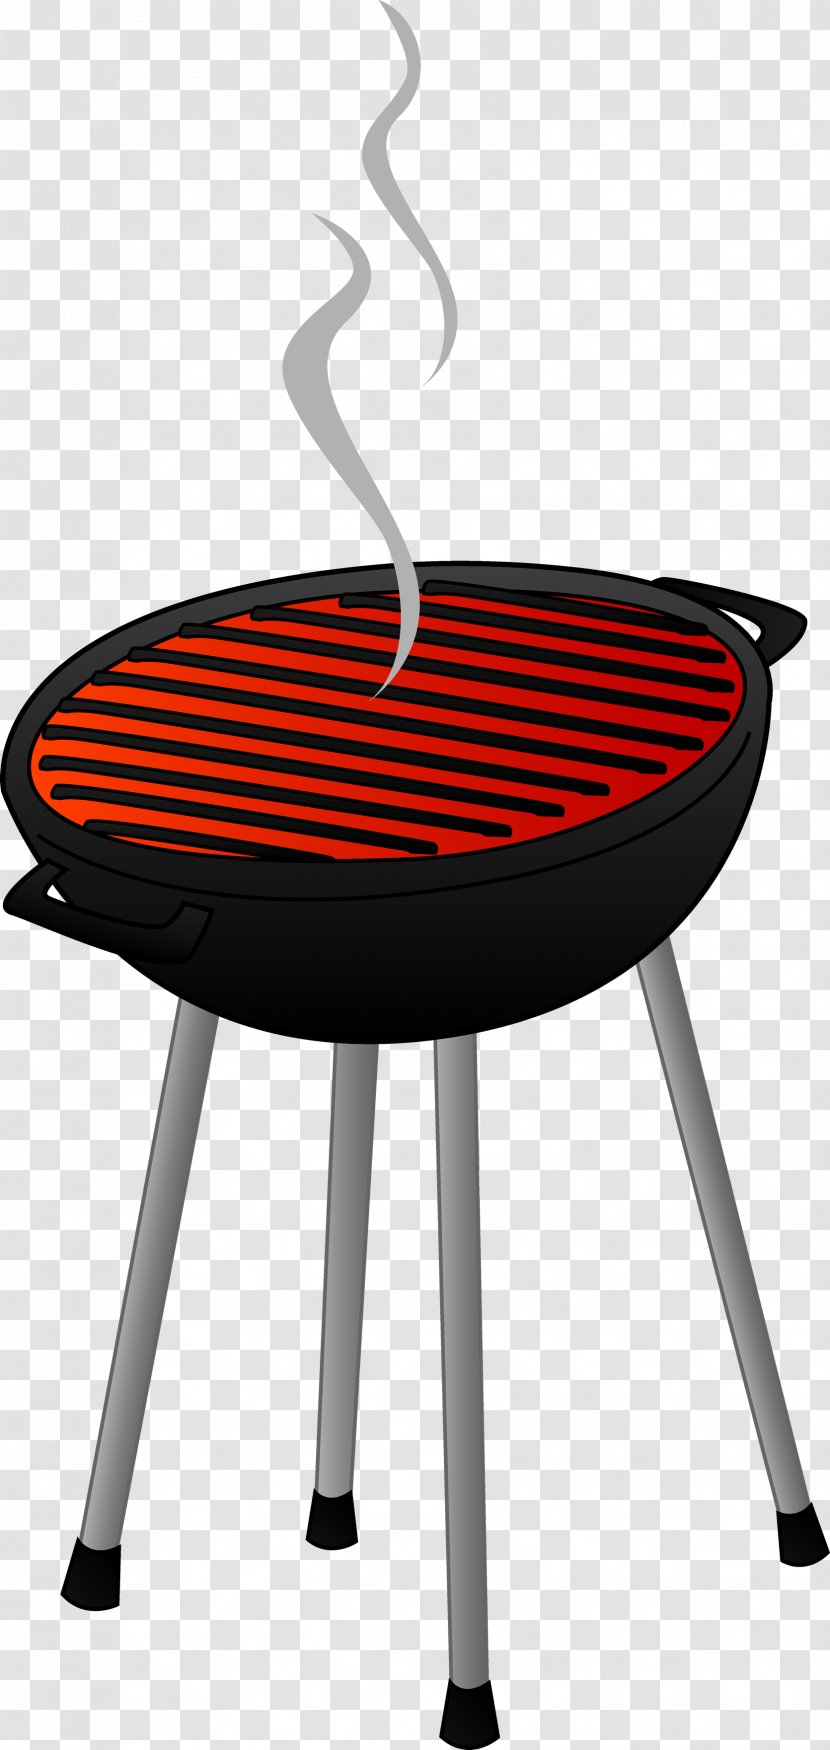 Barbecue Grill Grilling Sauce Clip Art Transparent PNG